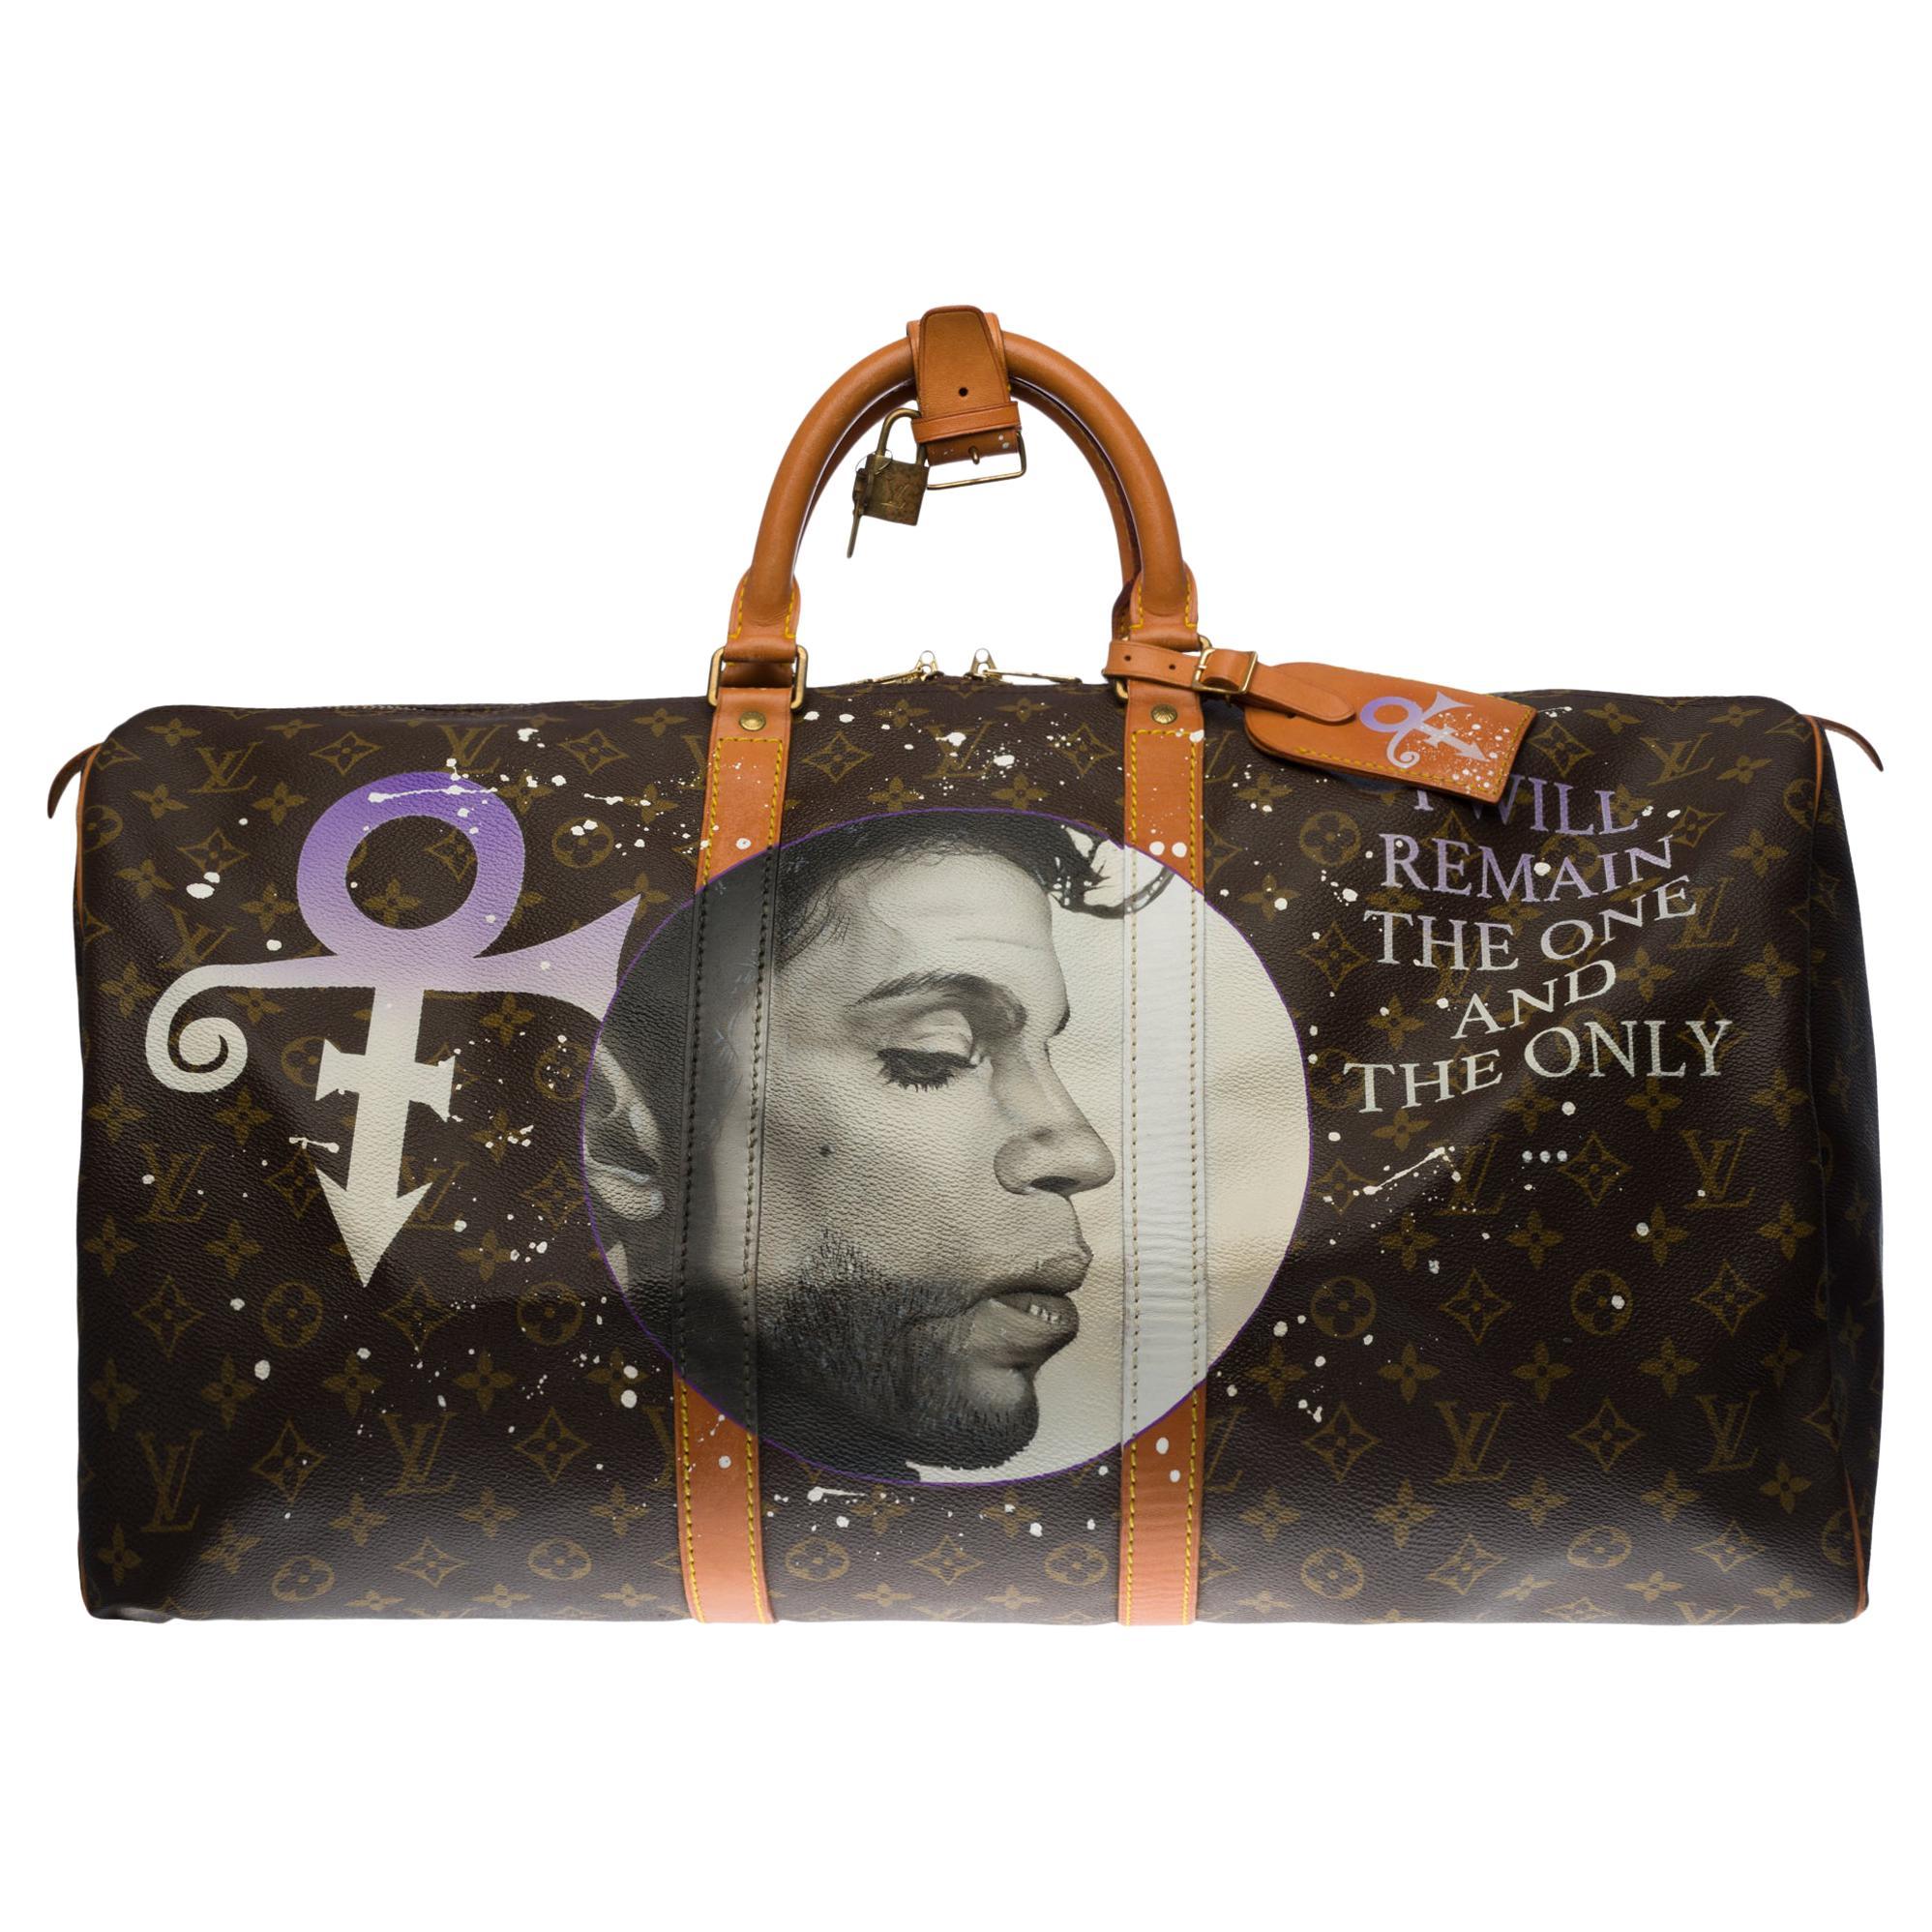 Louis Vuitton Unisex Collaboration Hard Type Luggage & Travel Bags